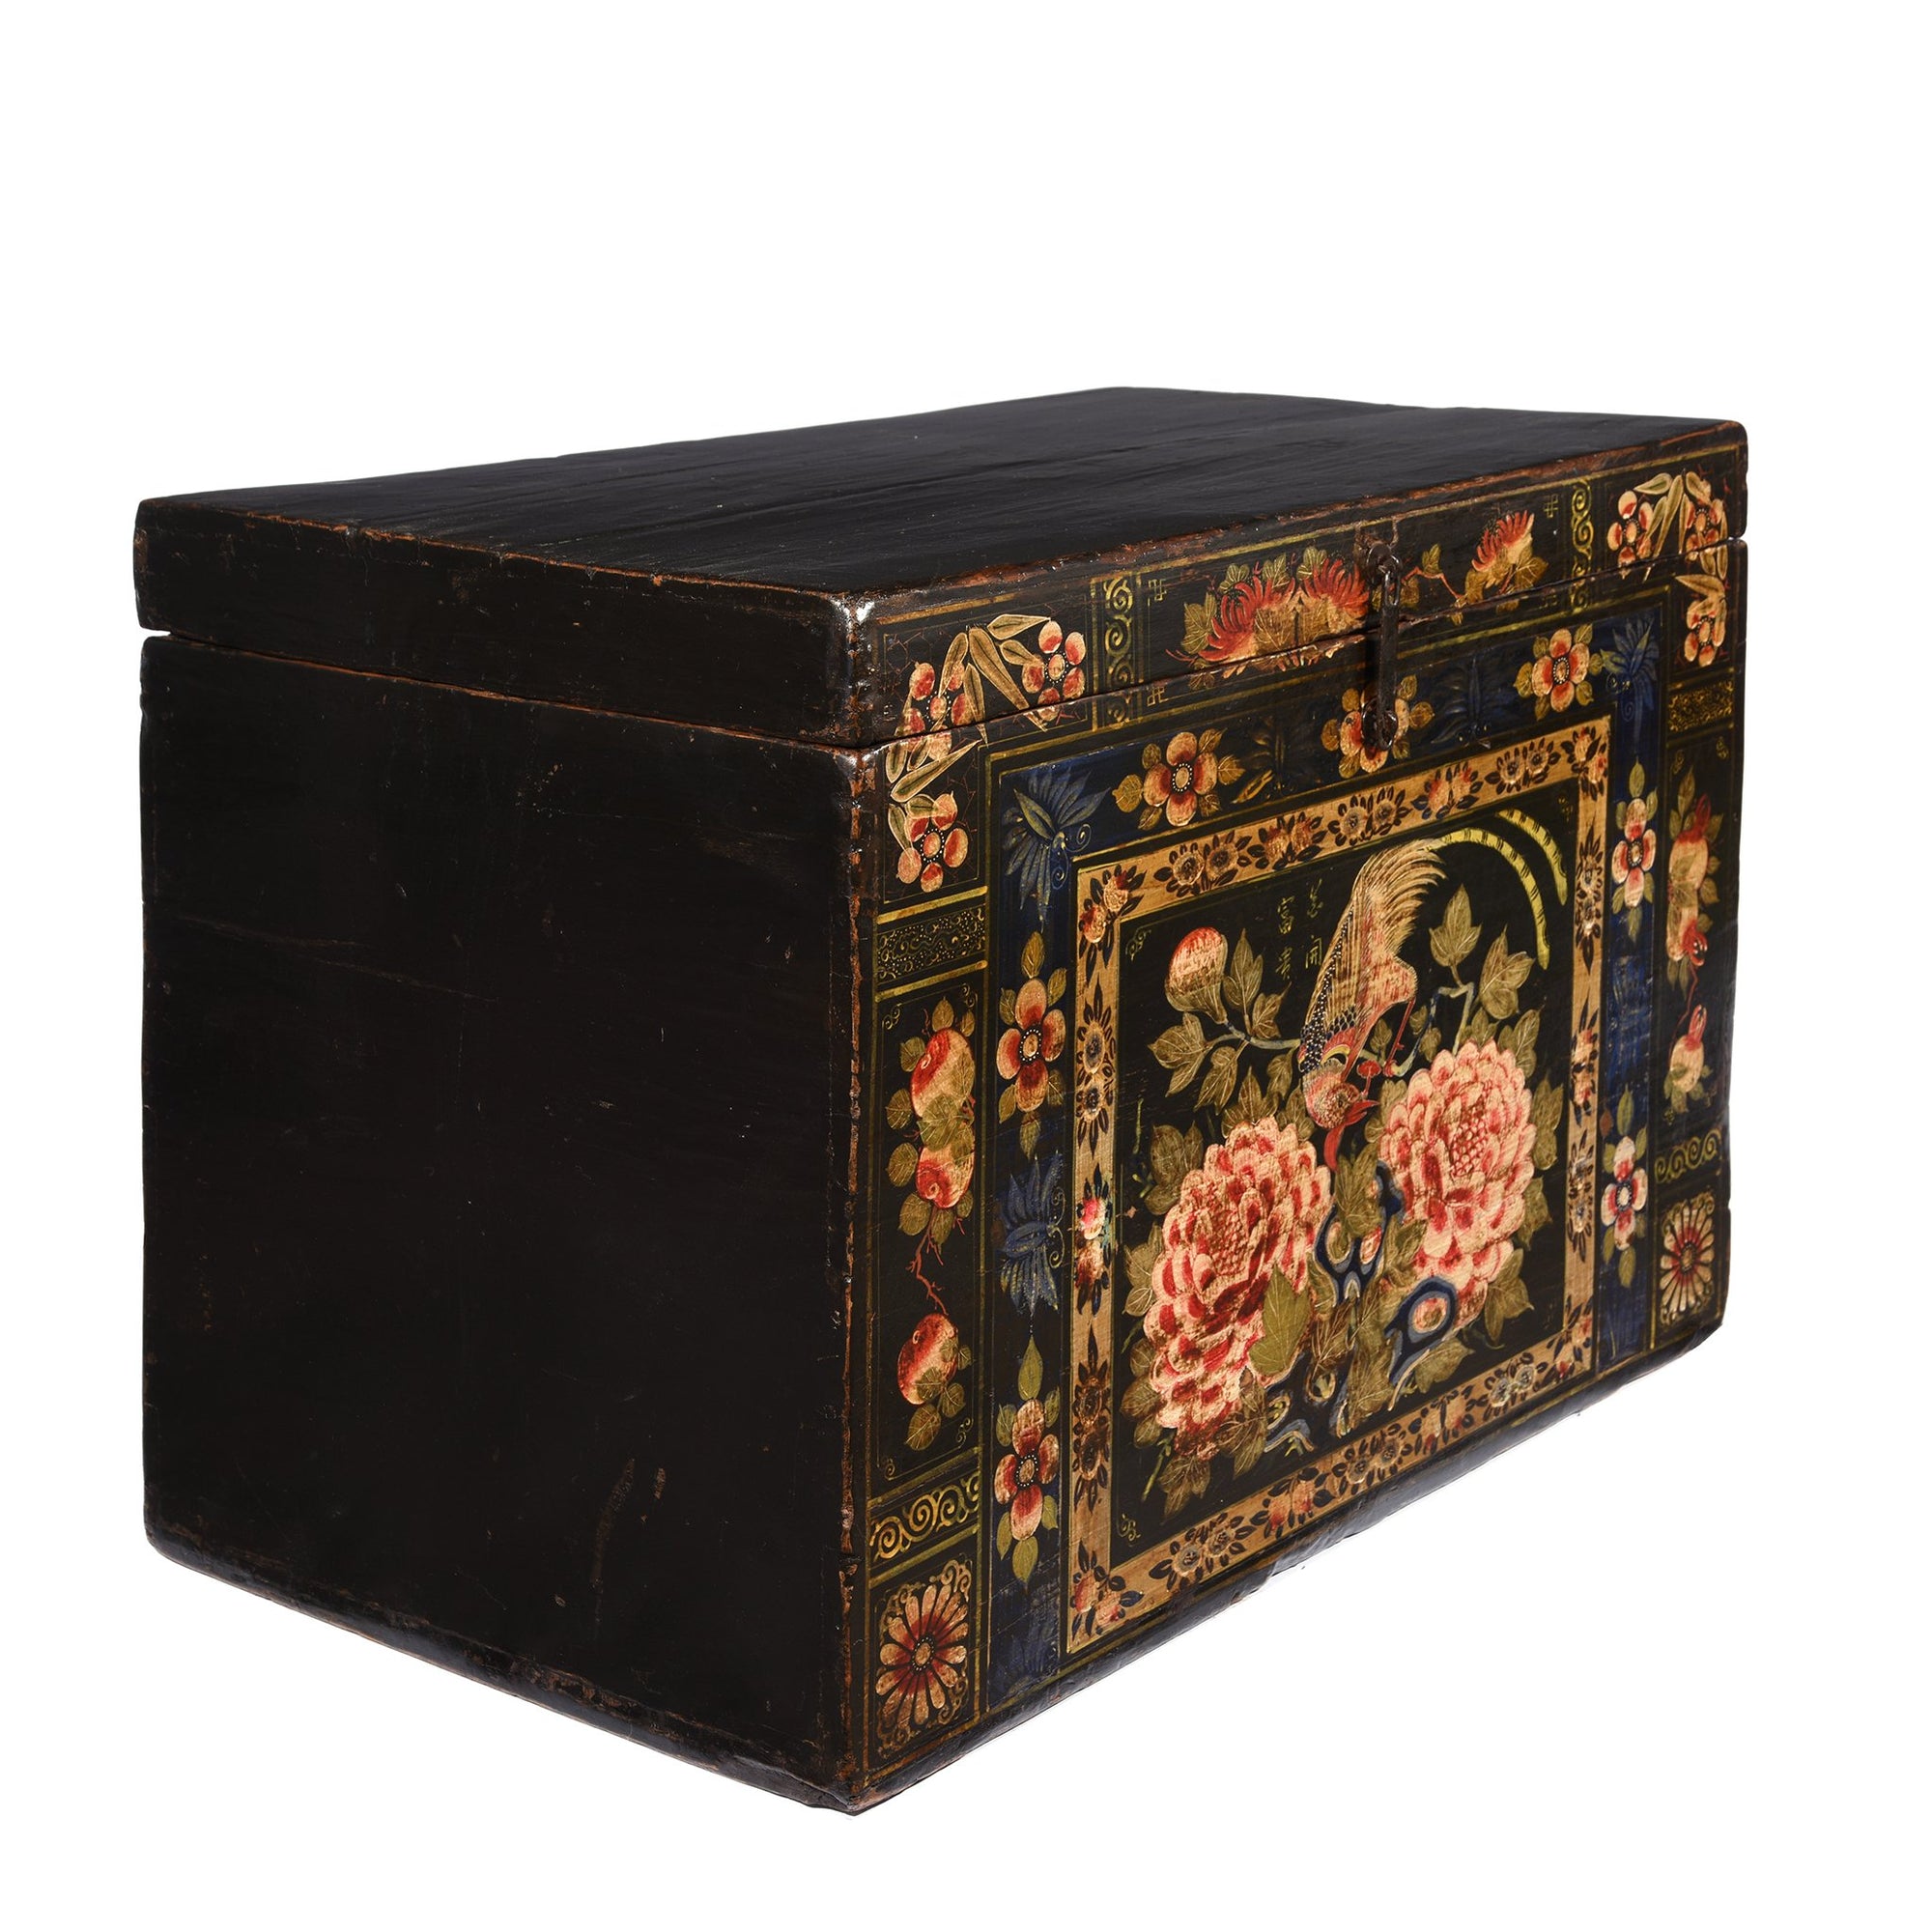 Painted Opera Chest From Shanxi Province - made from elm - circa 1900 | Indigo Antiques